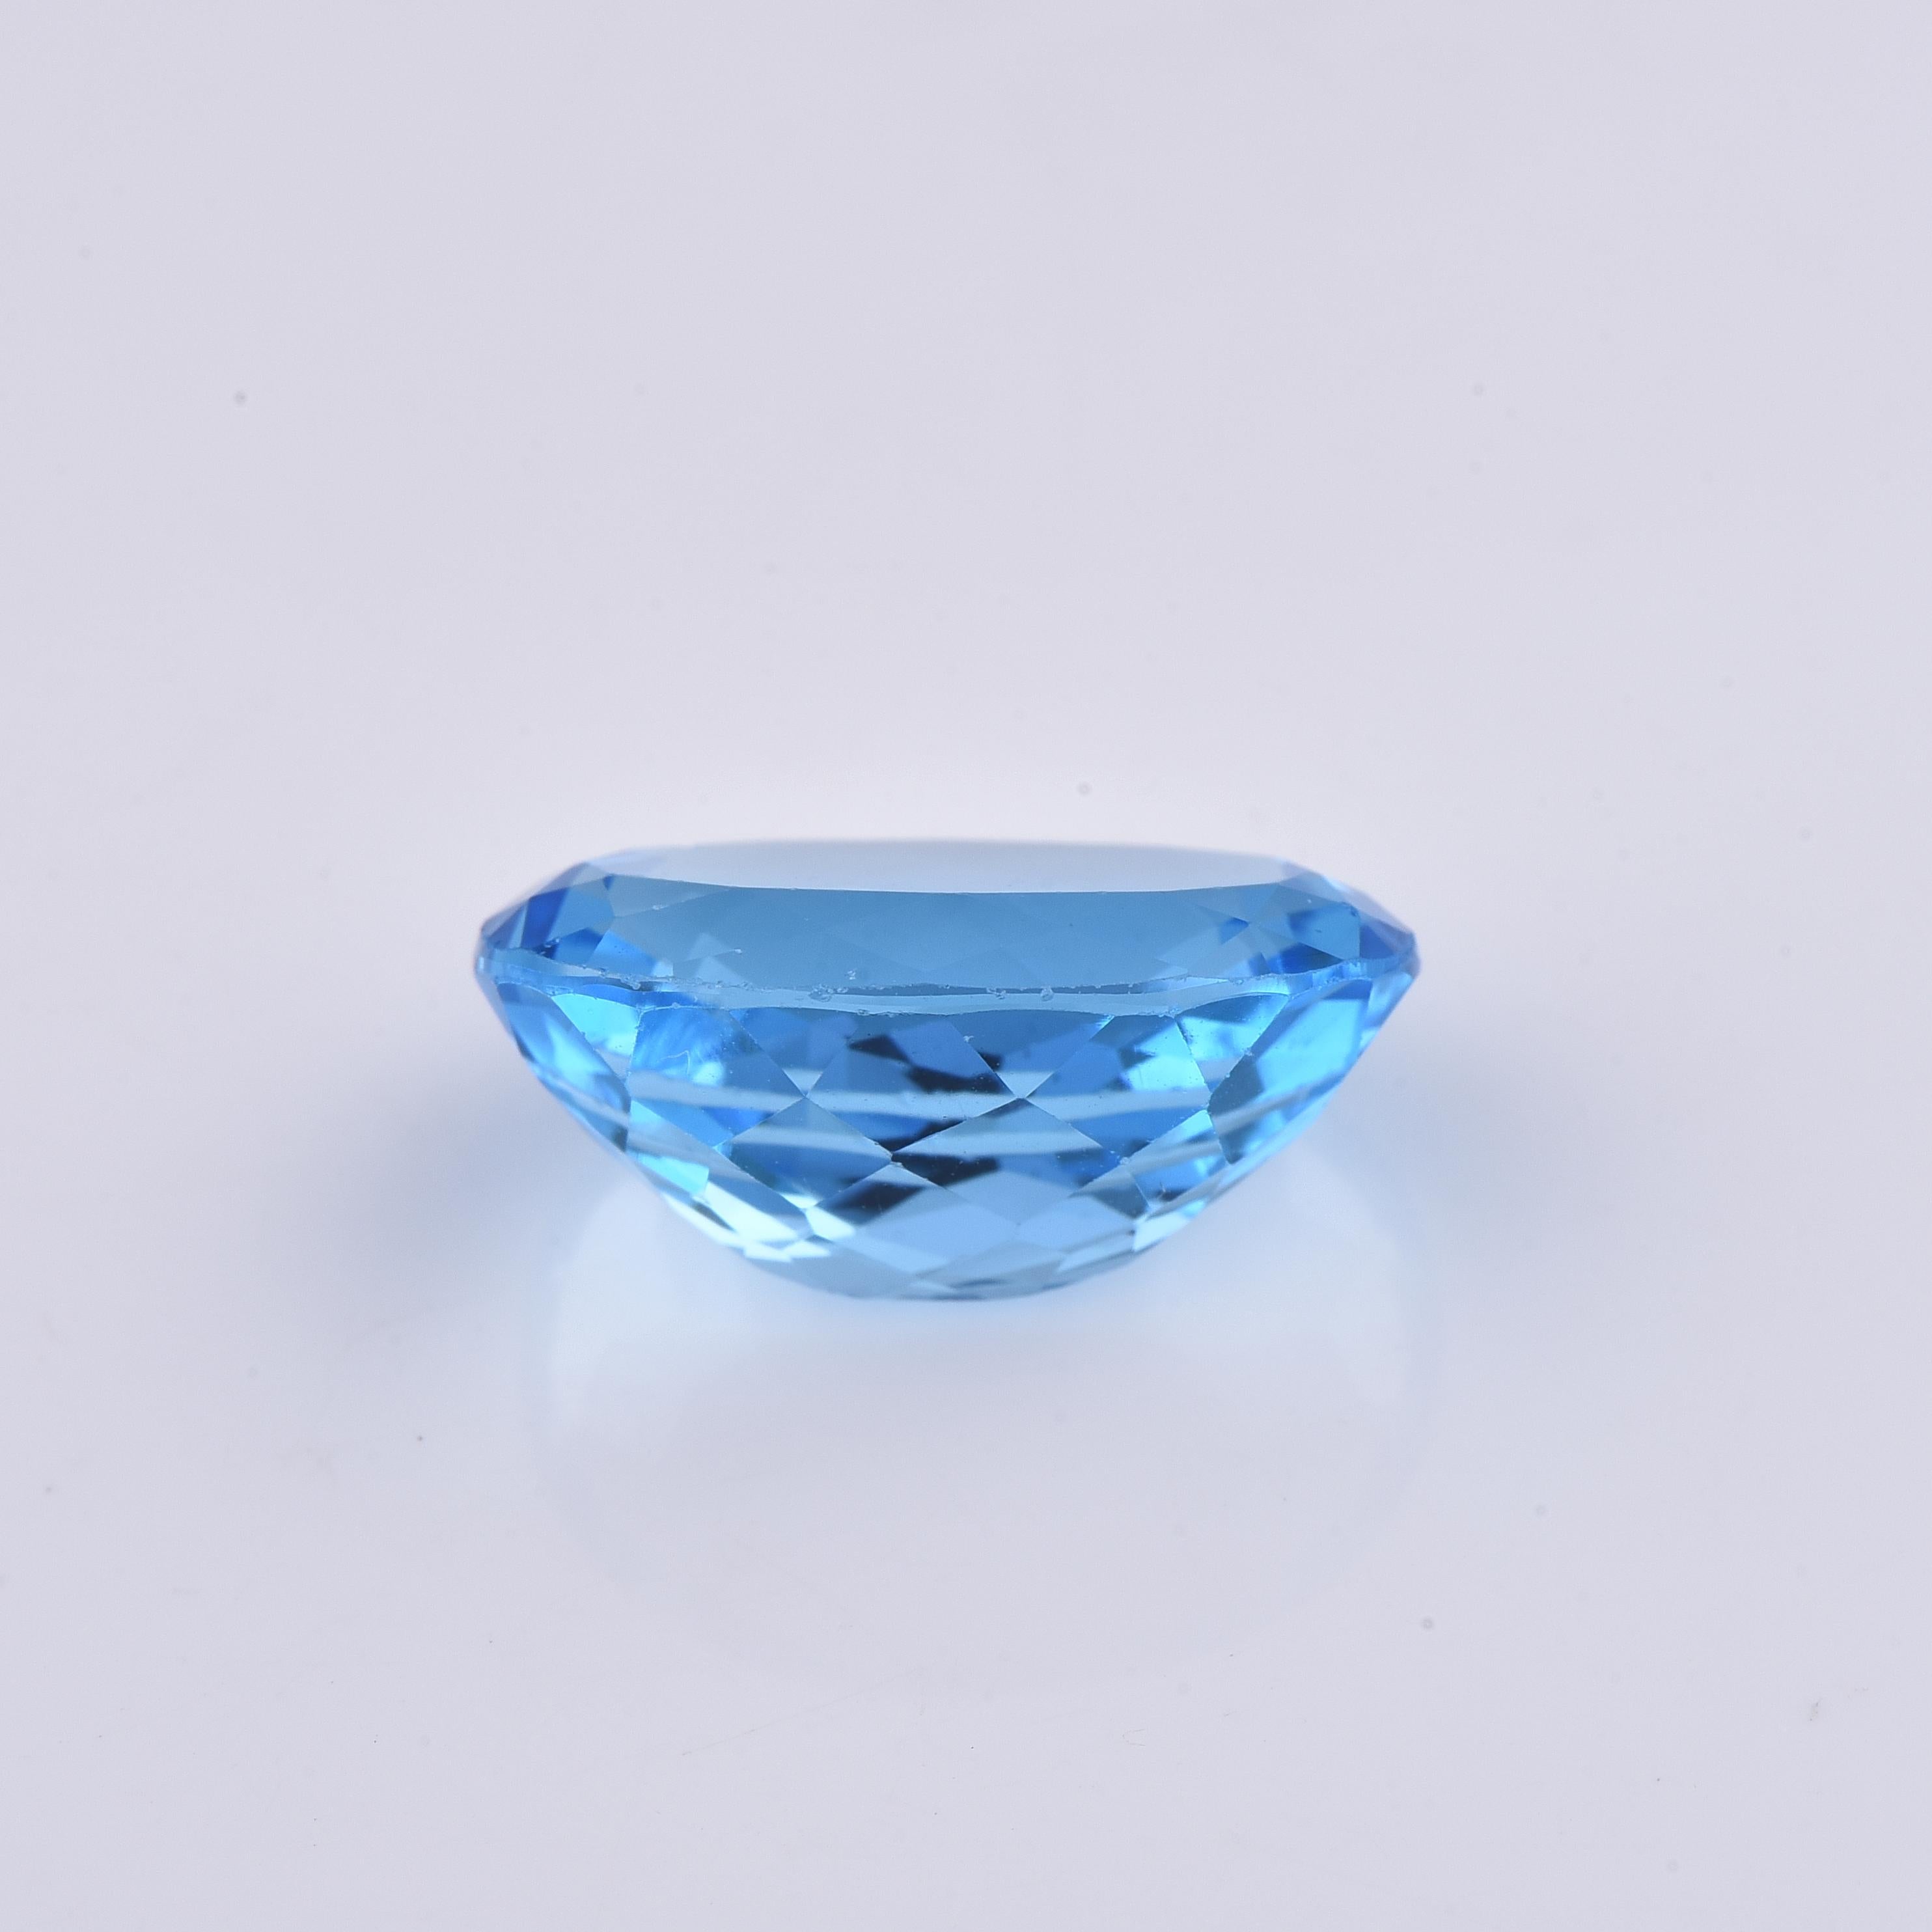 Stone Information: Natural Swiss Blue Topaz
Shape/Cut: Oval Shape
Color: Blue
Dimensions (mm): 16.00 x 12.00 x 7.96
Weight: 11.59ct